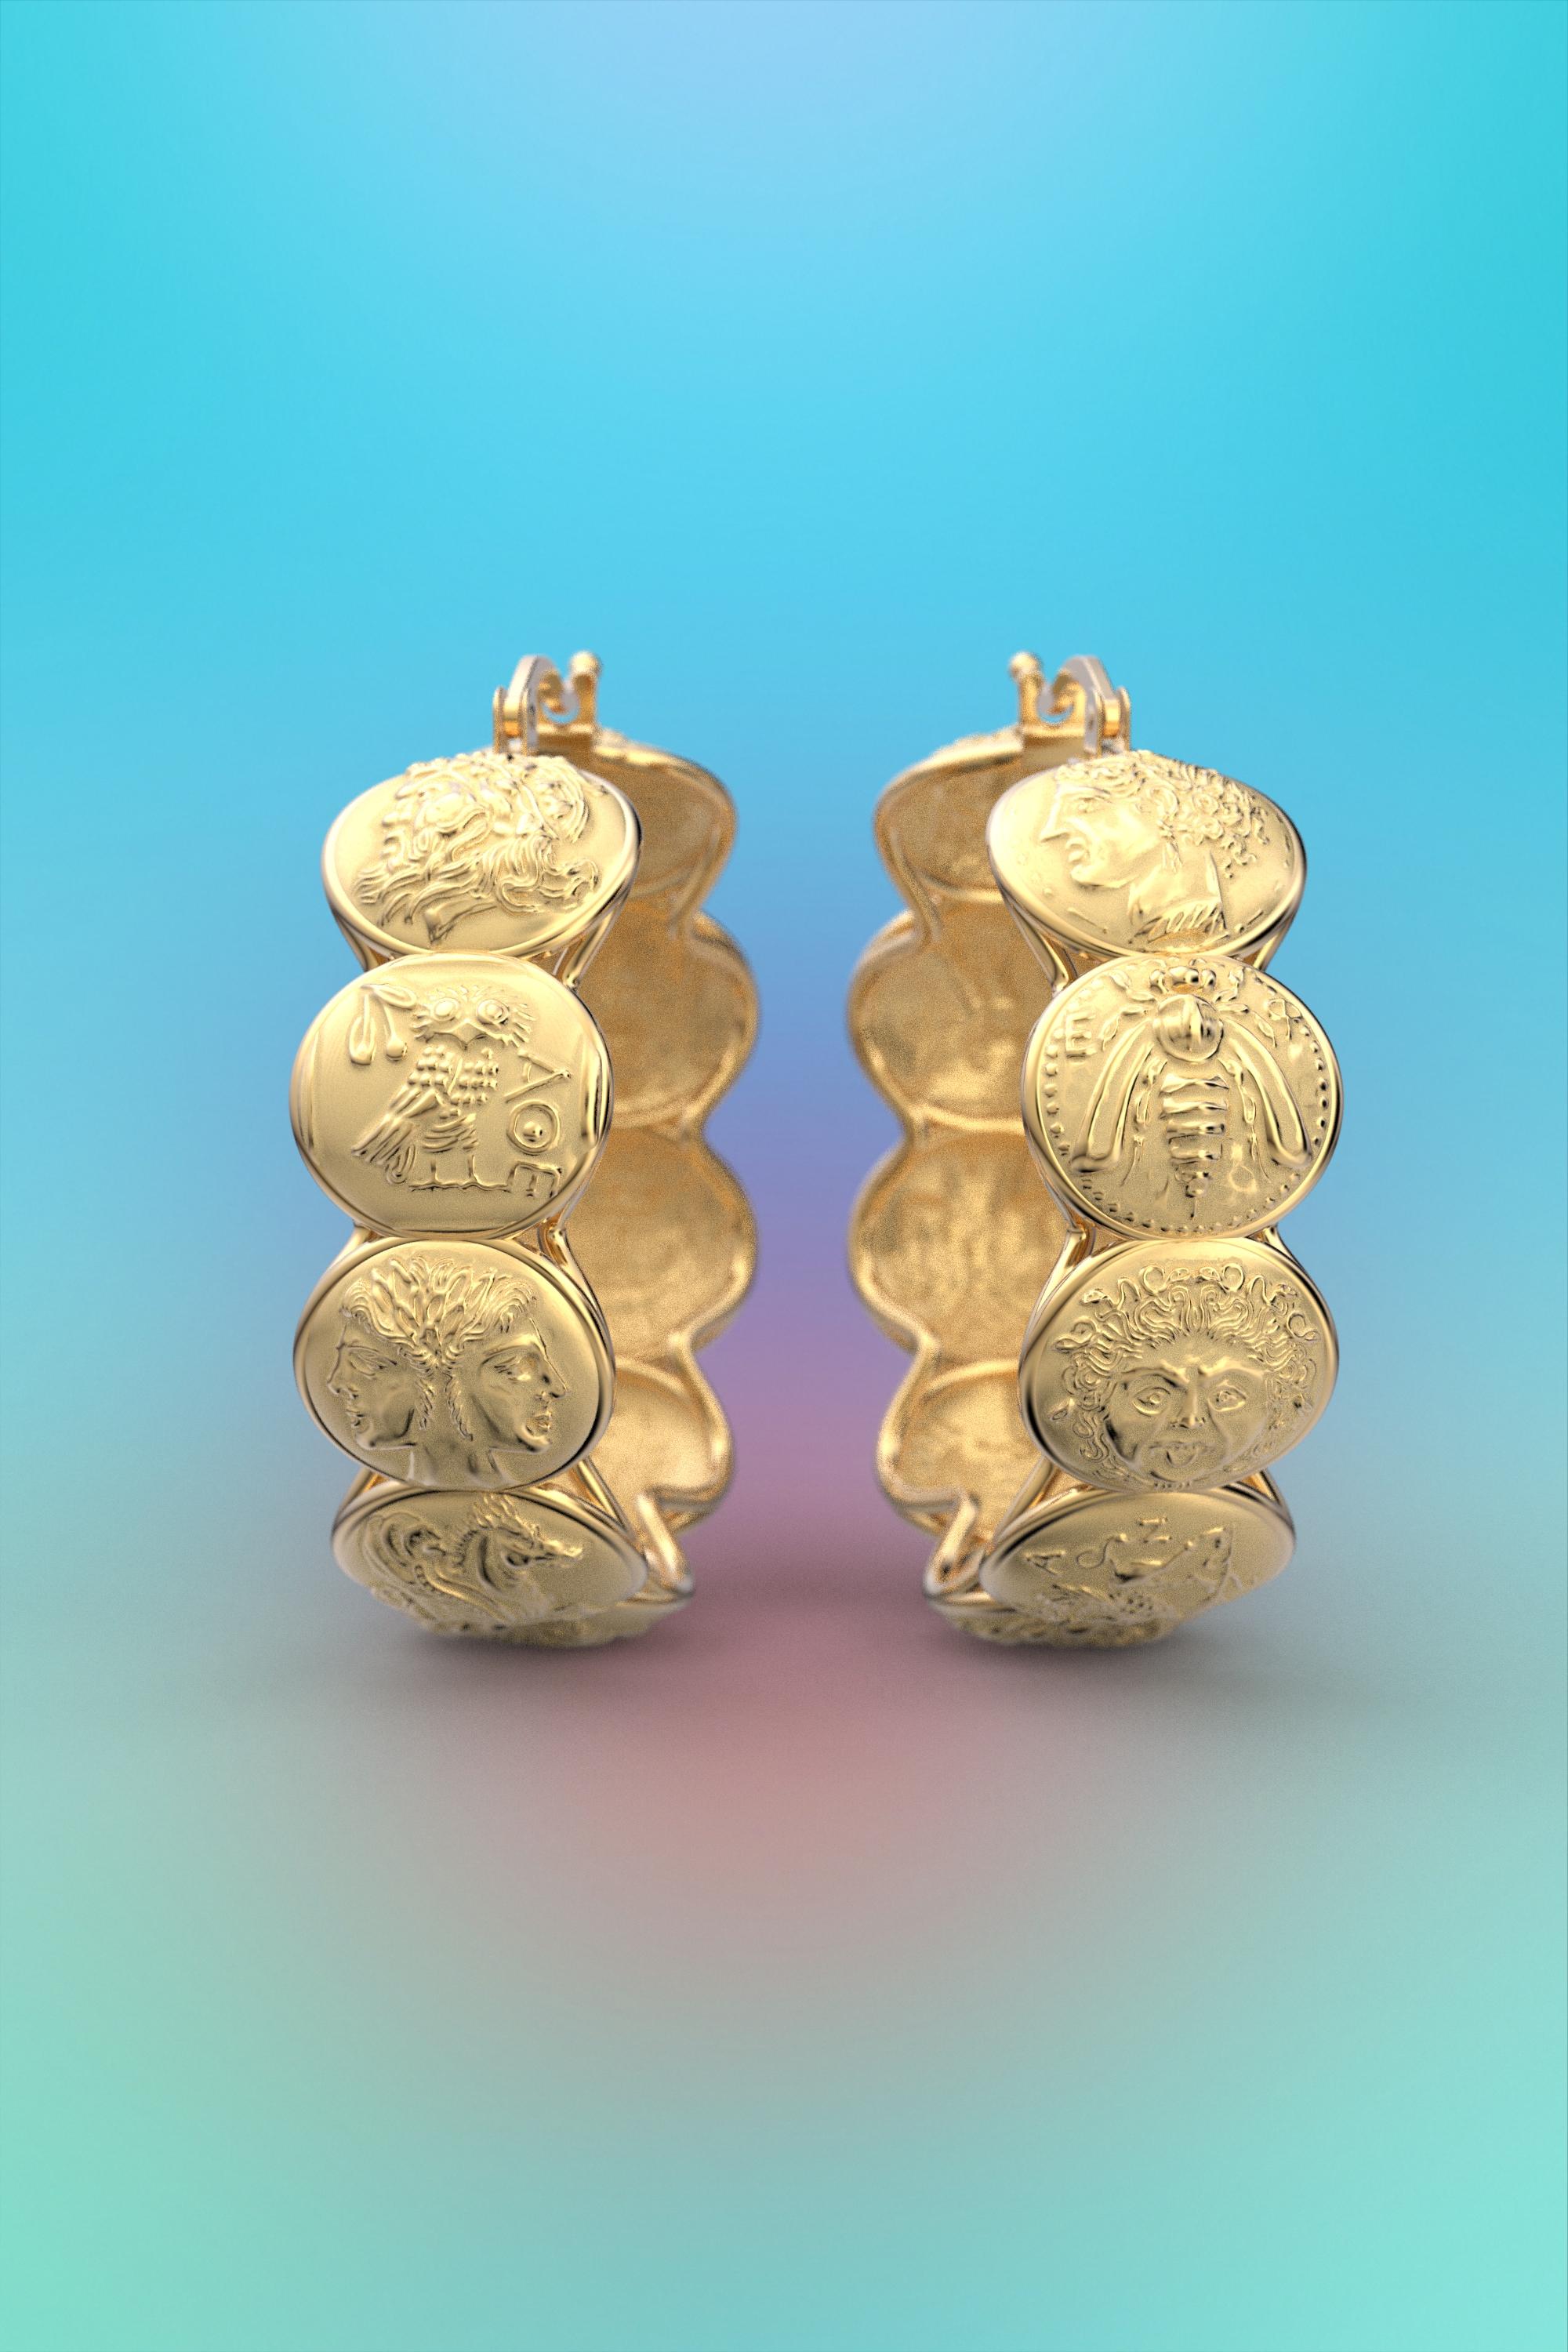 Welcome to Oltremare Gioielli, where we present our exquisite Gold Hoop Earrings inspired by the allure of ancient Greek coins. Each pair is meticulously crafted to order, exclusively available in your choice of 14k or 18k gold. Designed and